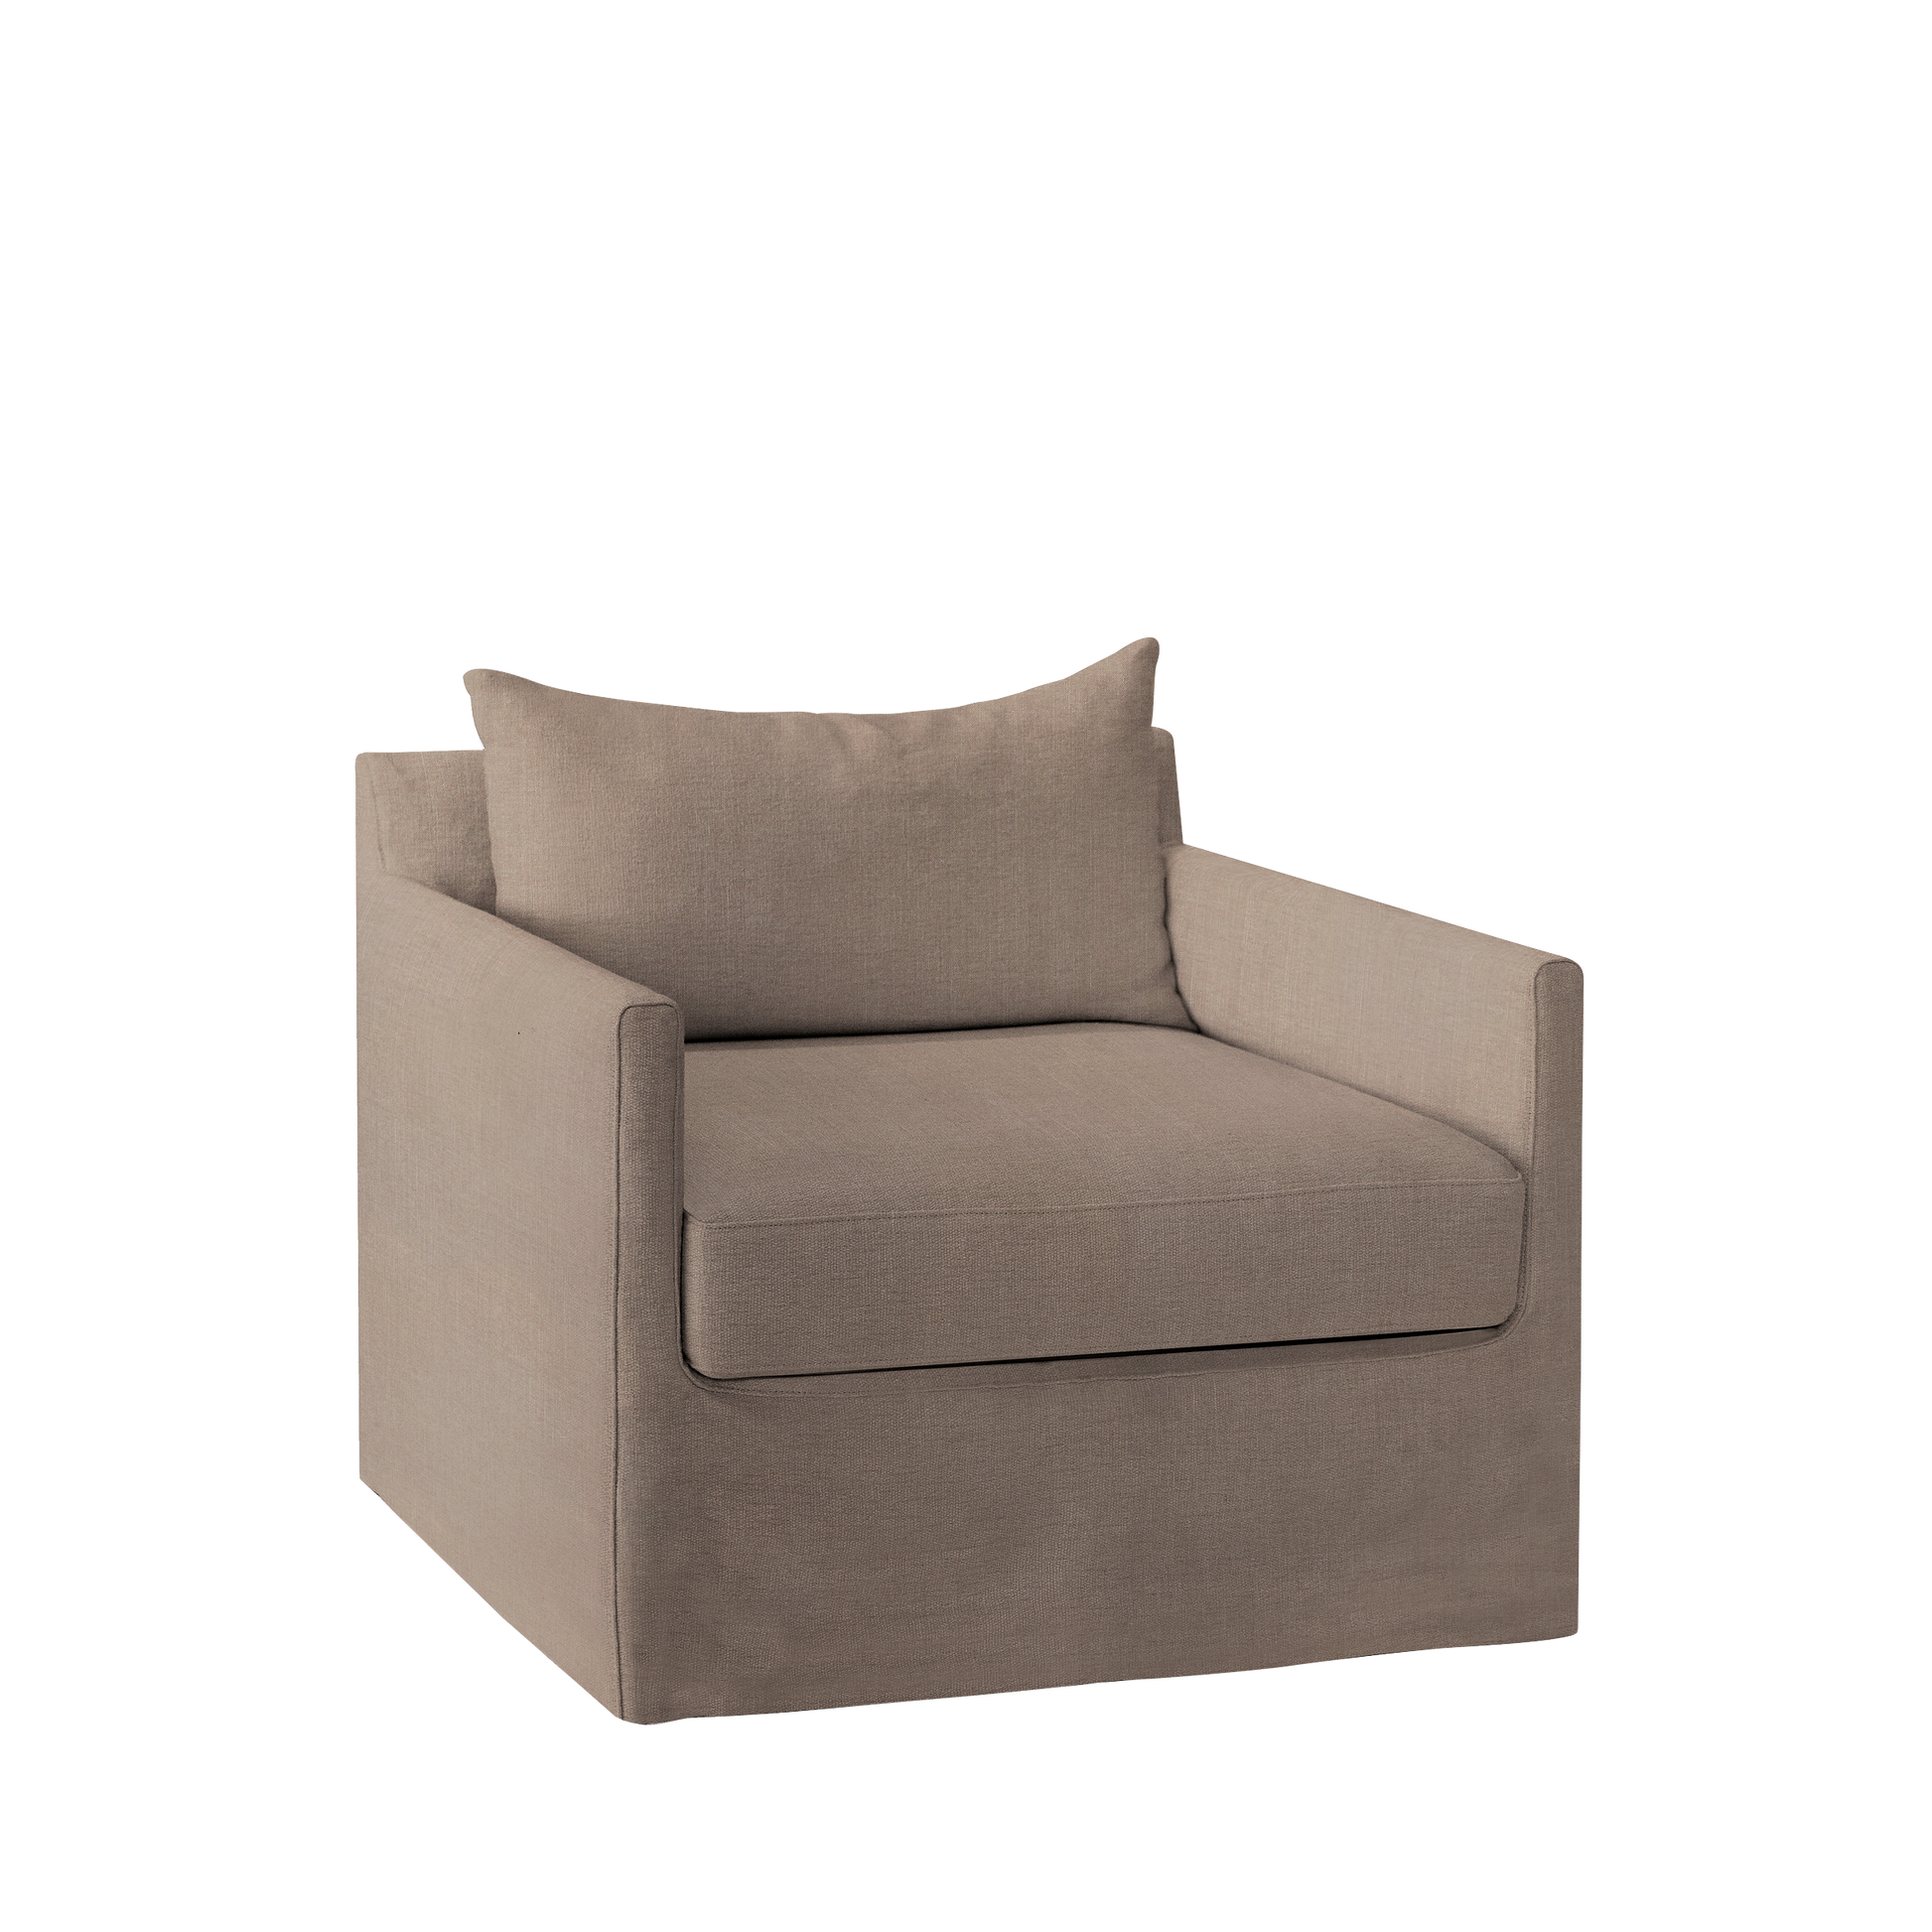 Extra wide Alba lounge chair with light brown textile